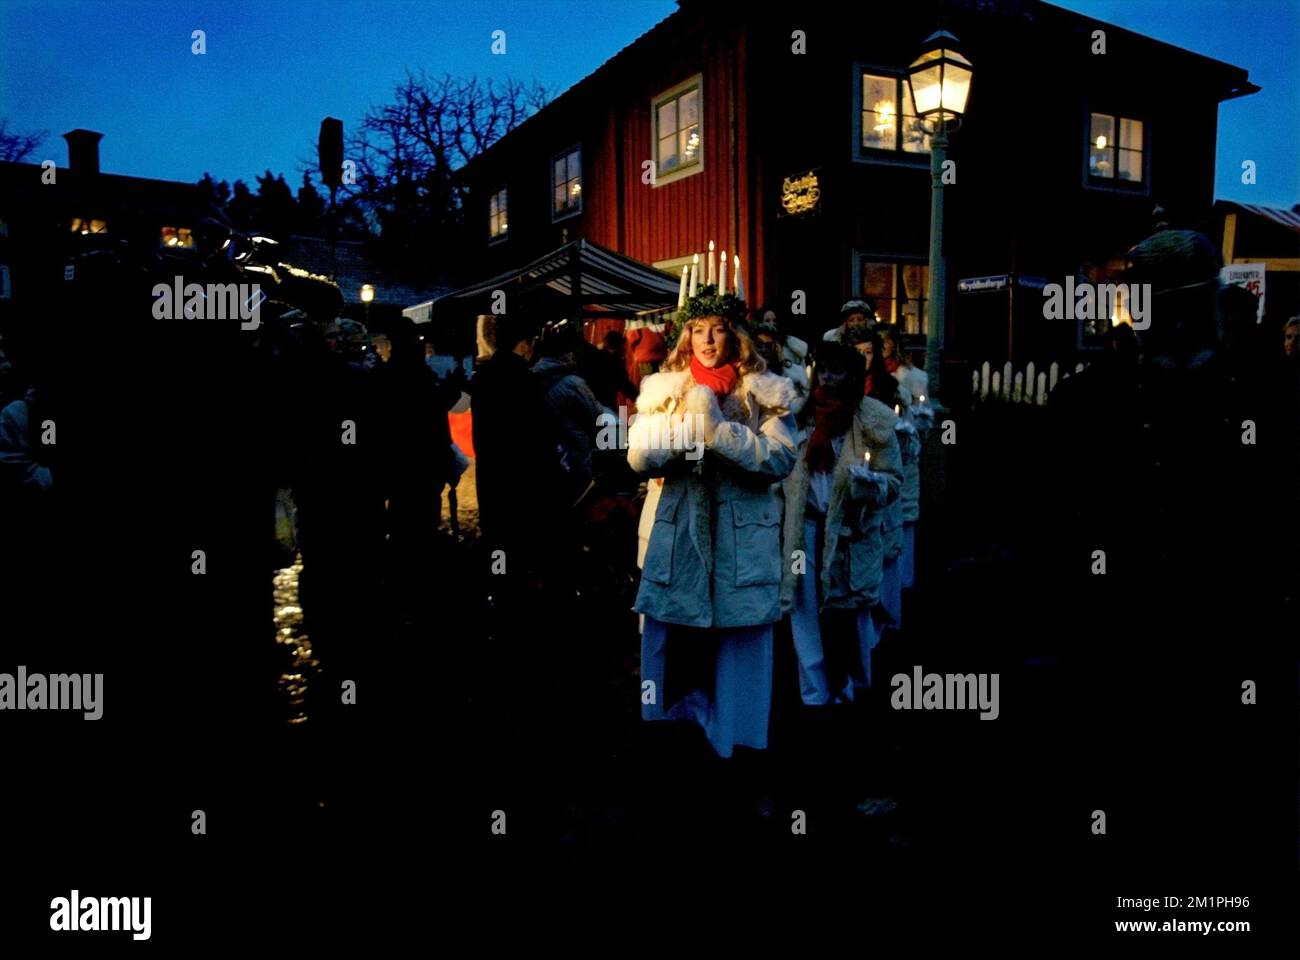 Lucia celebration, Old town Linköping, Sweden. Stock Photo